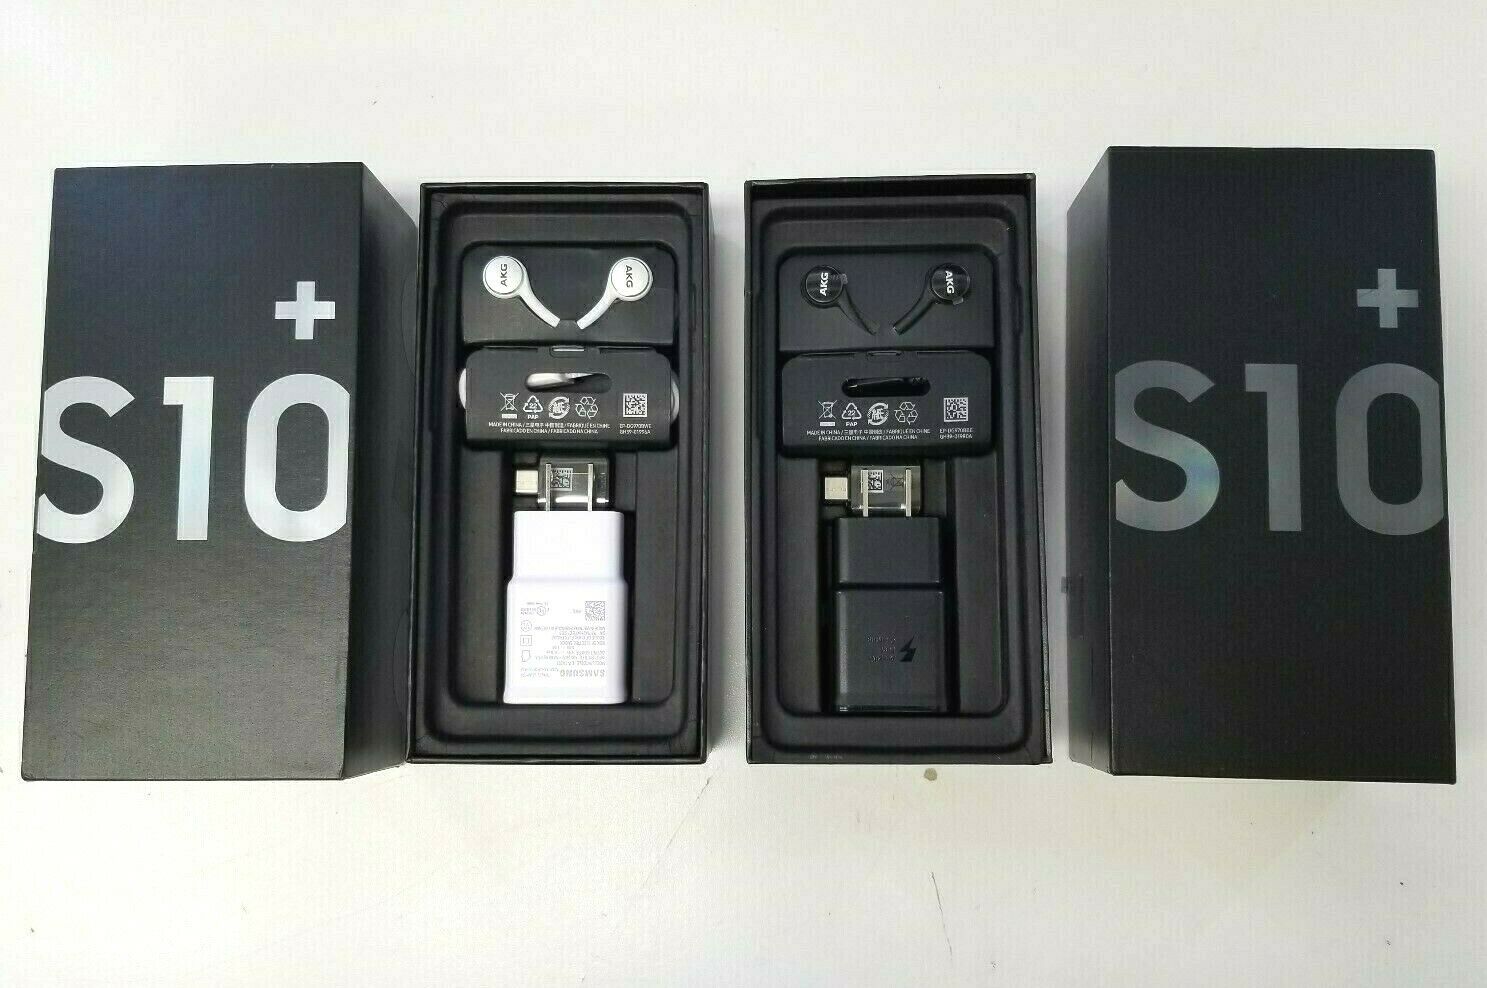 Samsung Galaxy S10 Plus Original Retail Box With All Oem Accessories Included